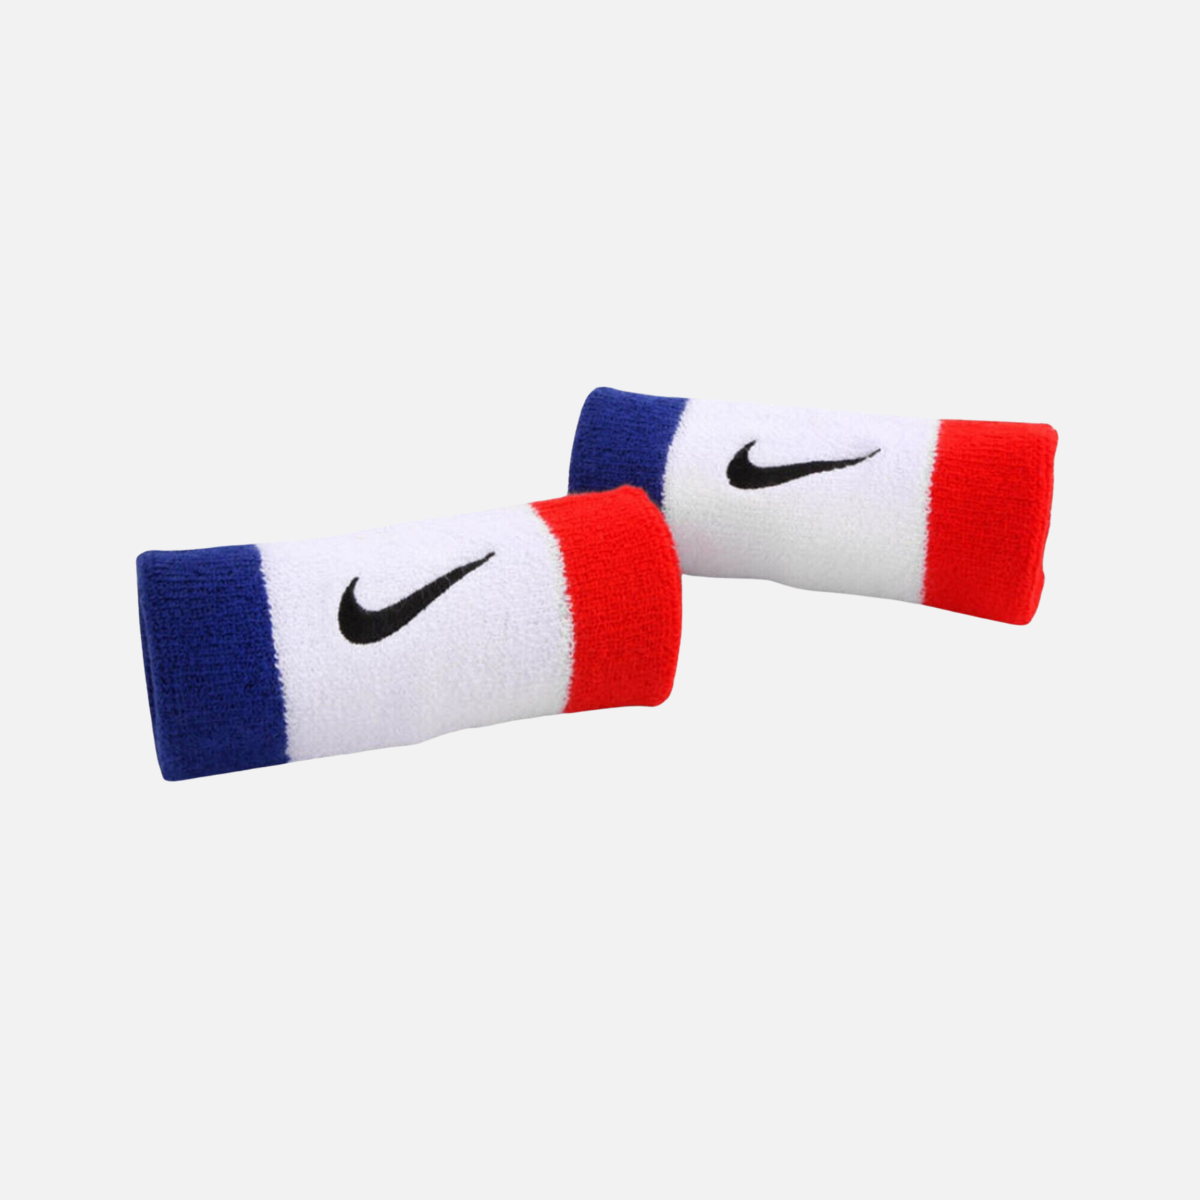 Nike Swoosh Double Wide Unisex Wristband -Blue/White/Red